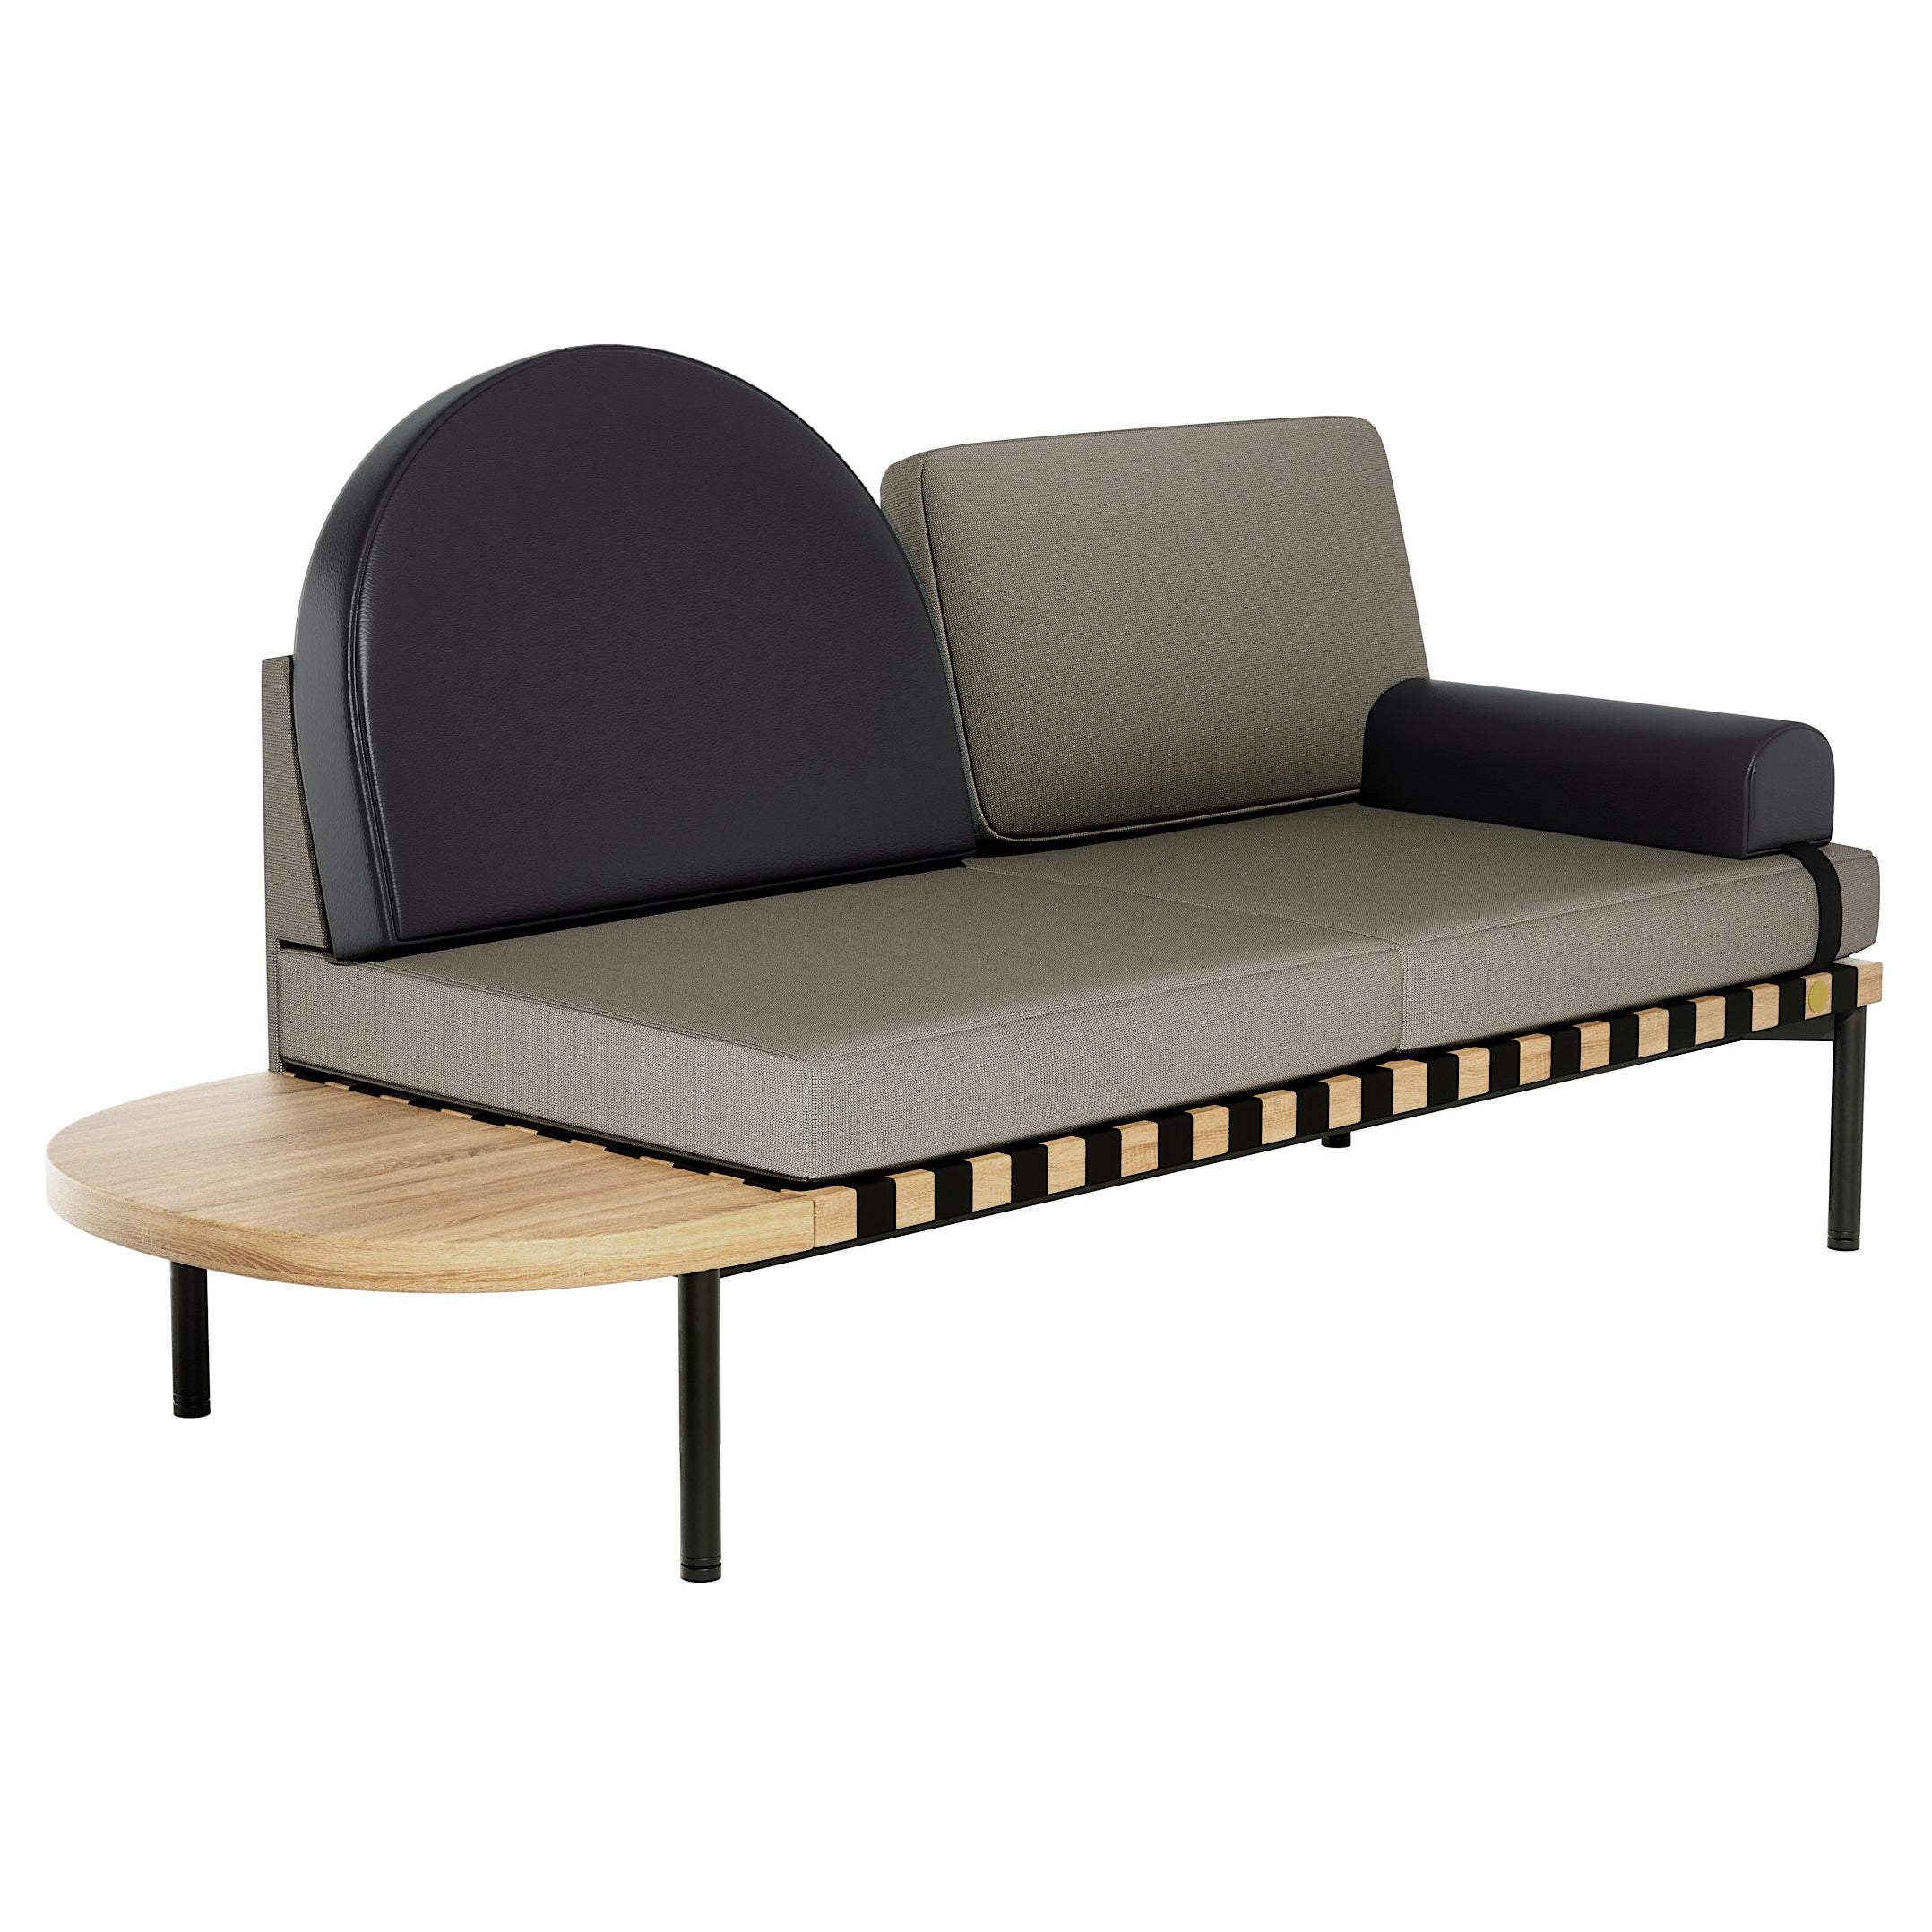 Petite Friture Grid Daybed in Grey-Black Upholstery by Studio Pool, 2015 For Sale